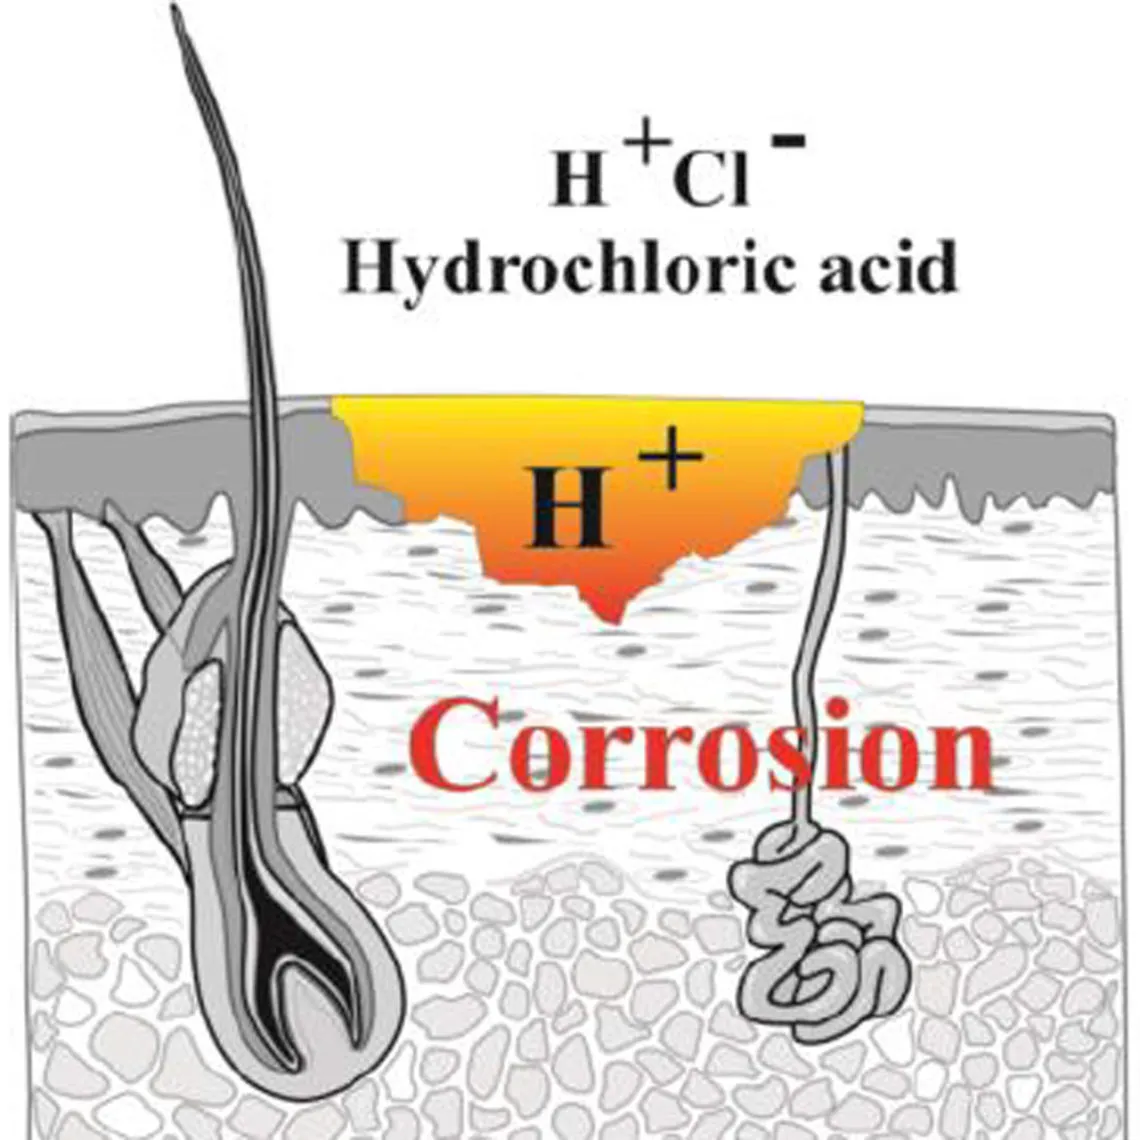 diagram showing the effects of hydrochloric acid on the organism in contact with it: corrosion